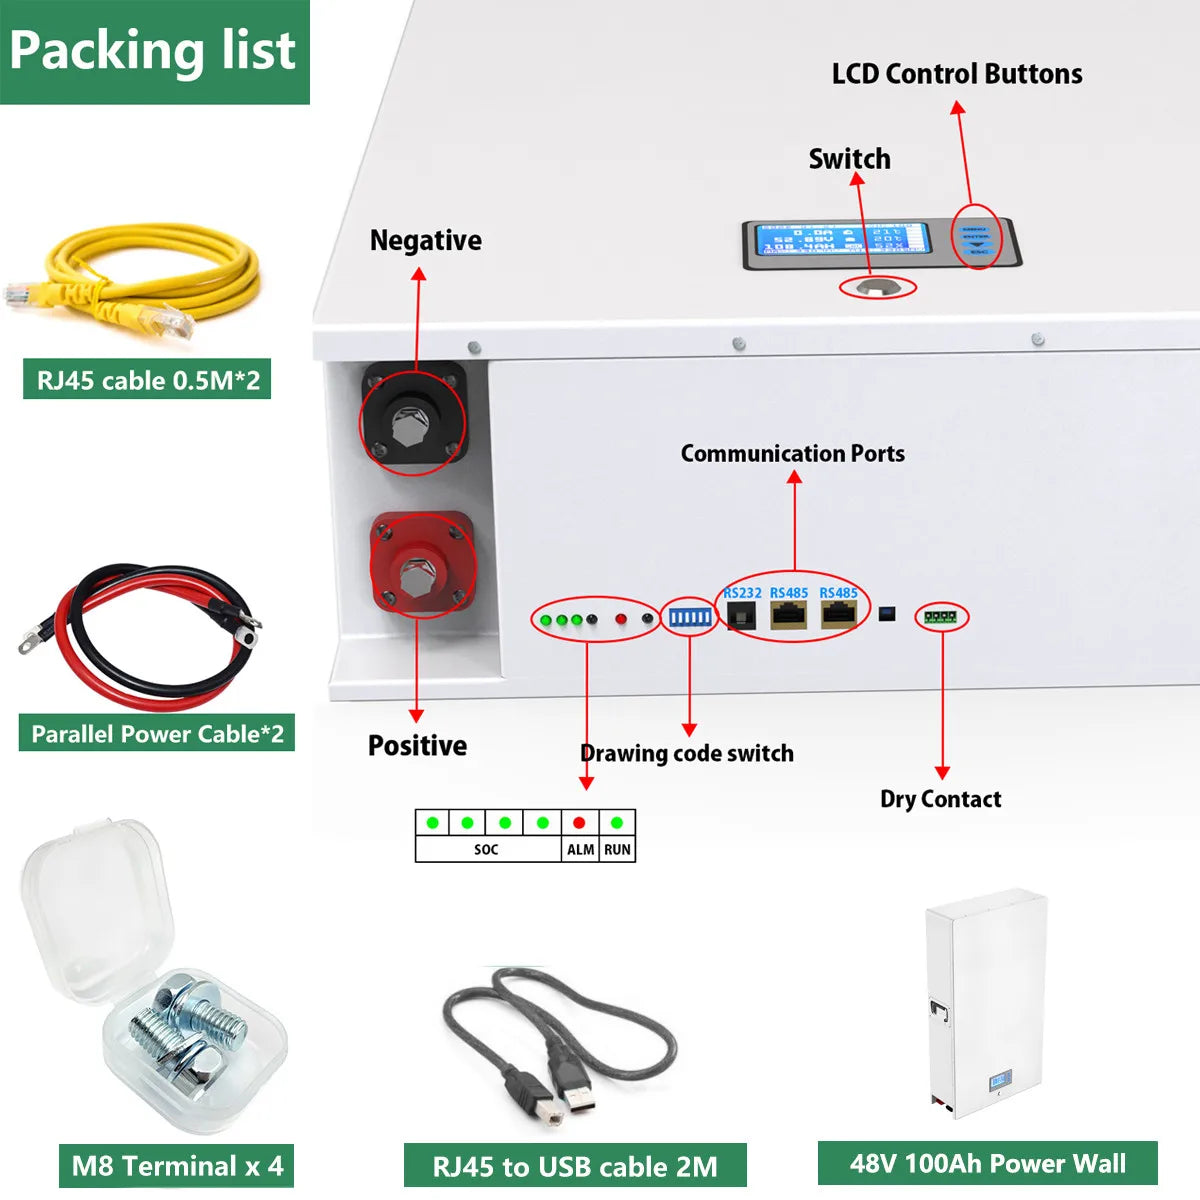 LiFePO4 48V 200AH Powerwall Battery, BMS Package Contents: LCD Display, Controls, Cables & Terminals for 48V LiFePO4 Battery Management System